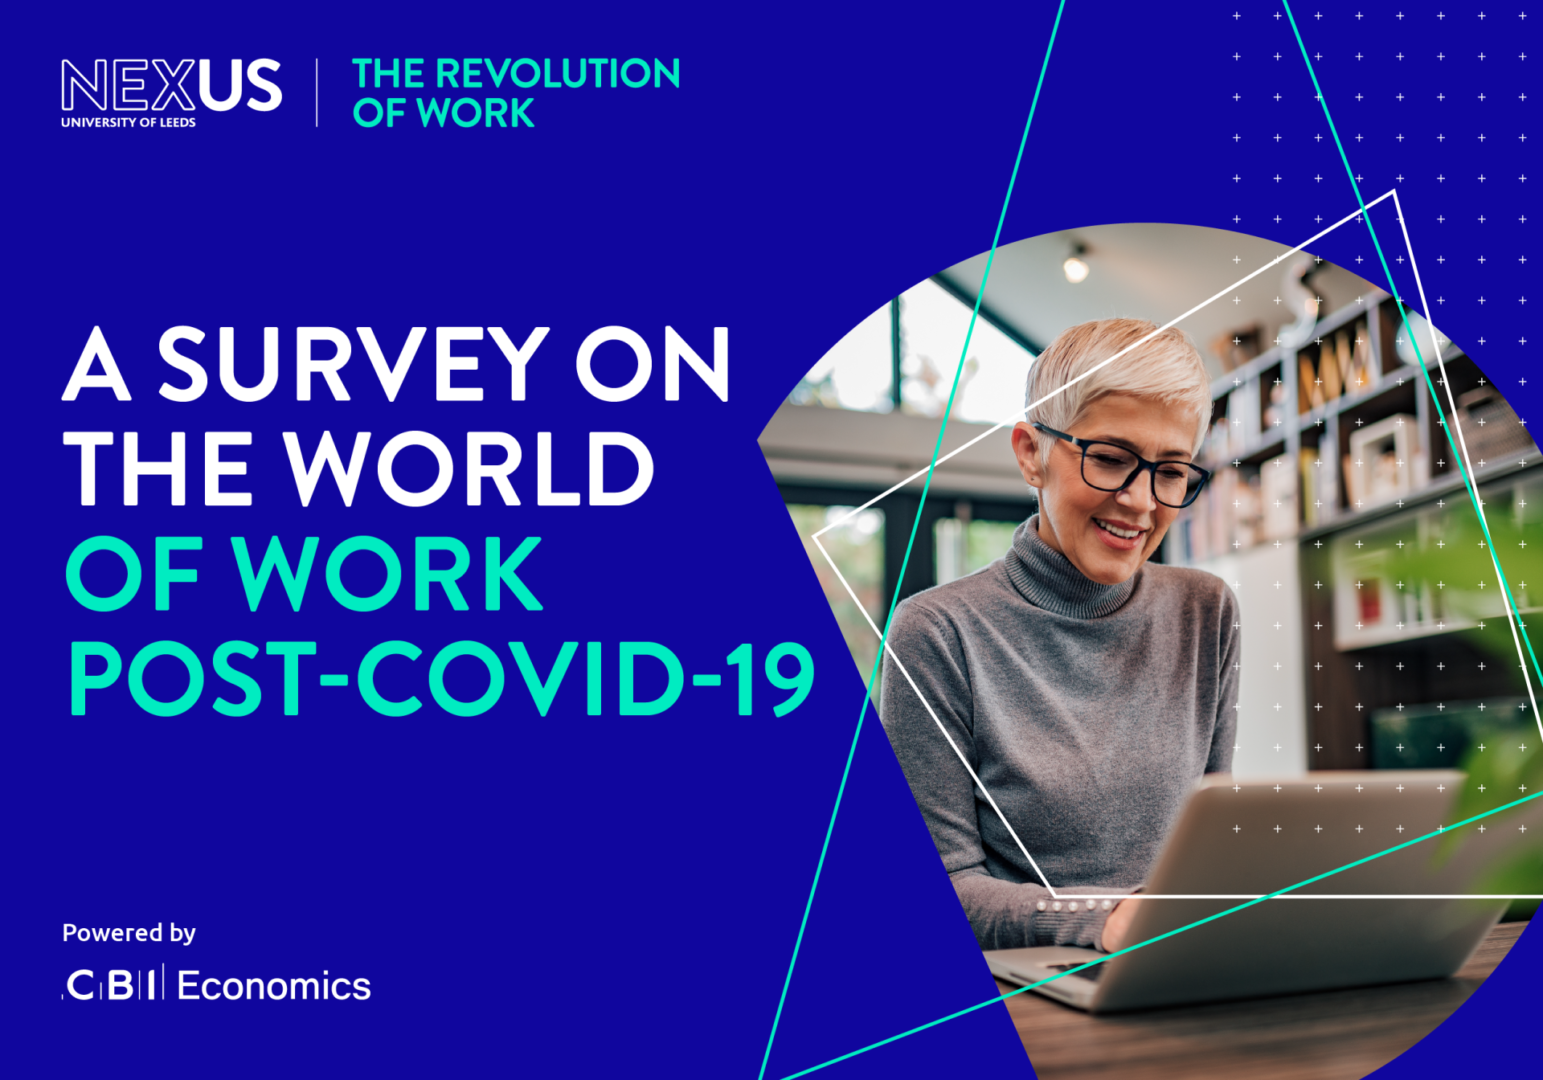 A survey on the world of work post-covid-19